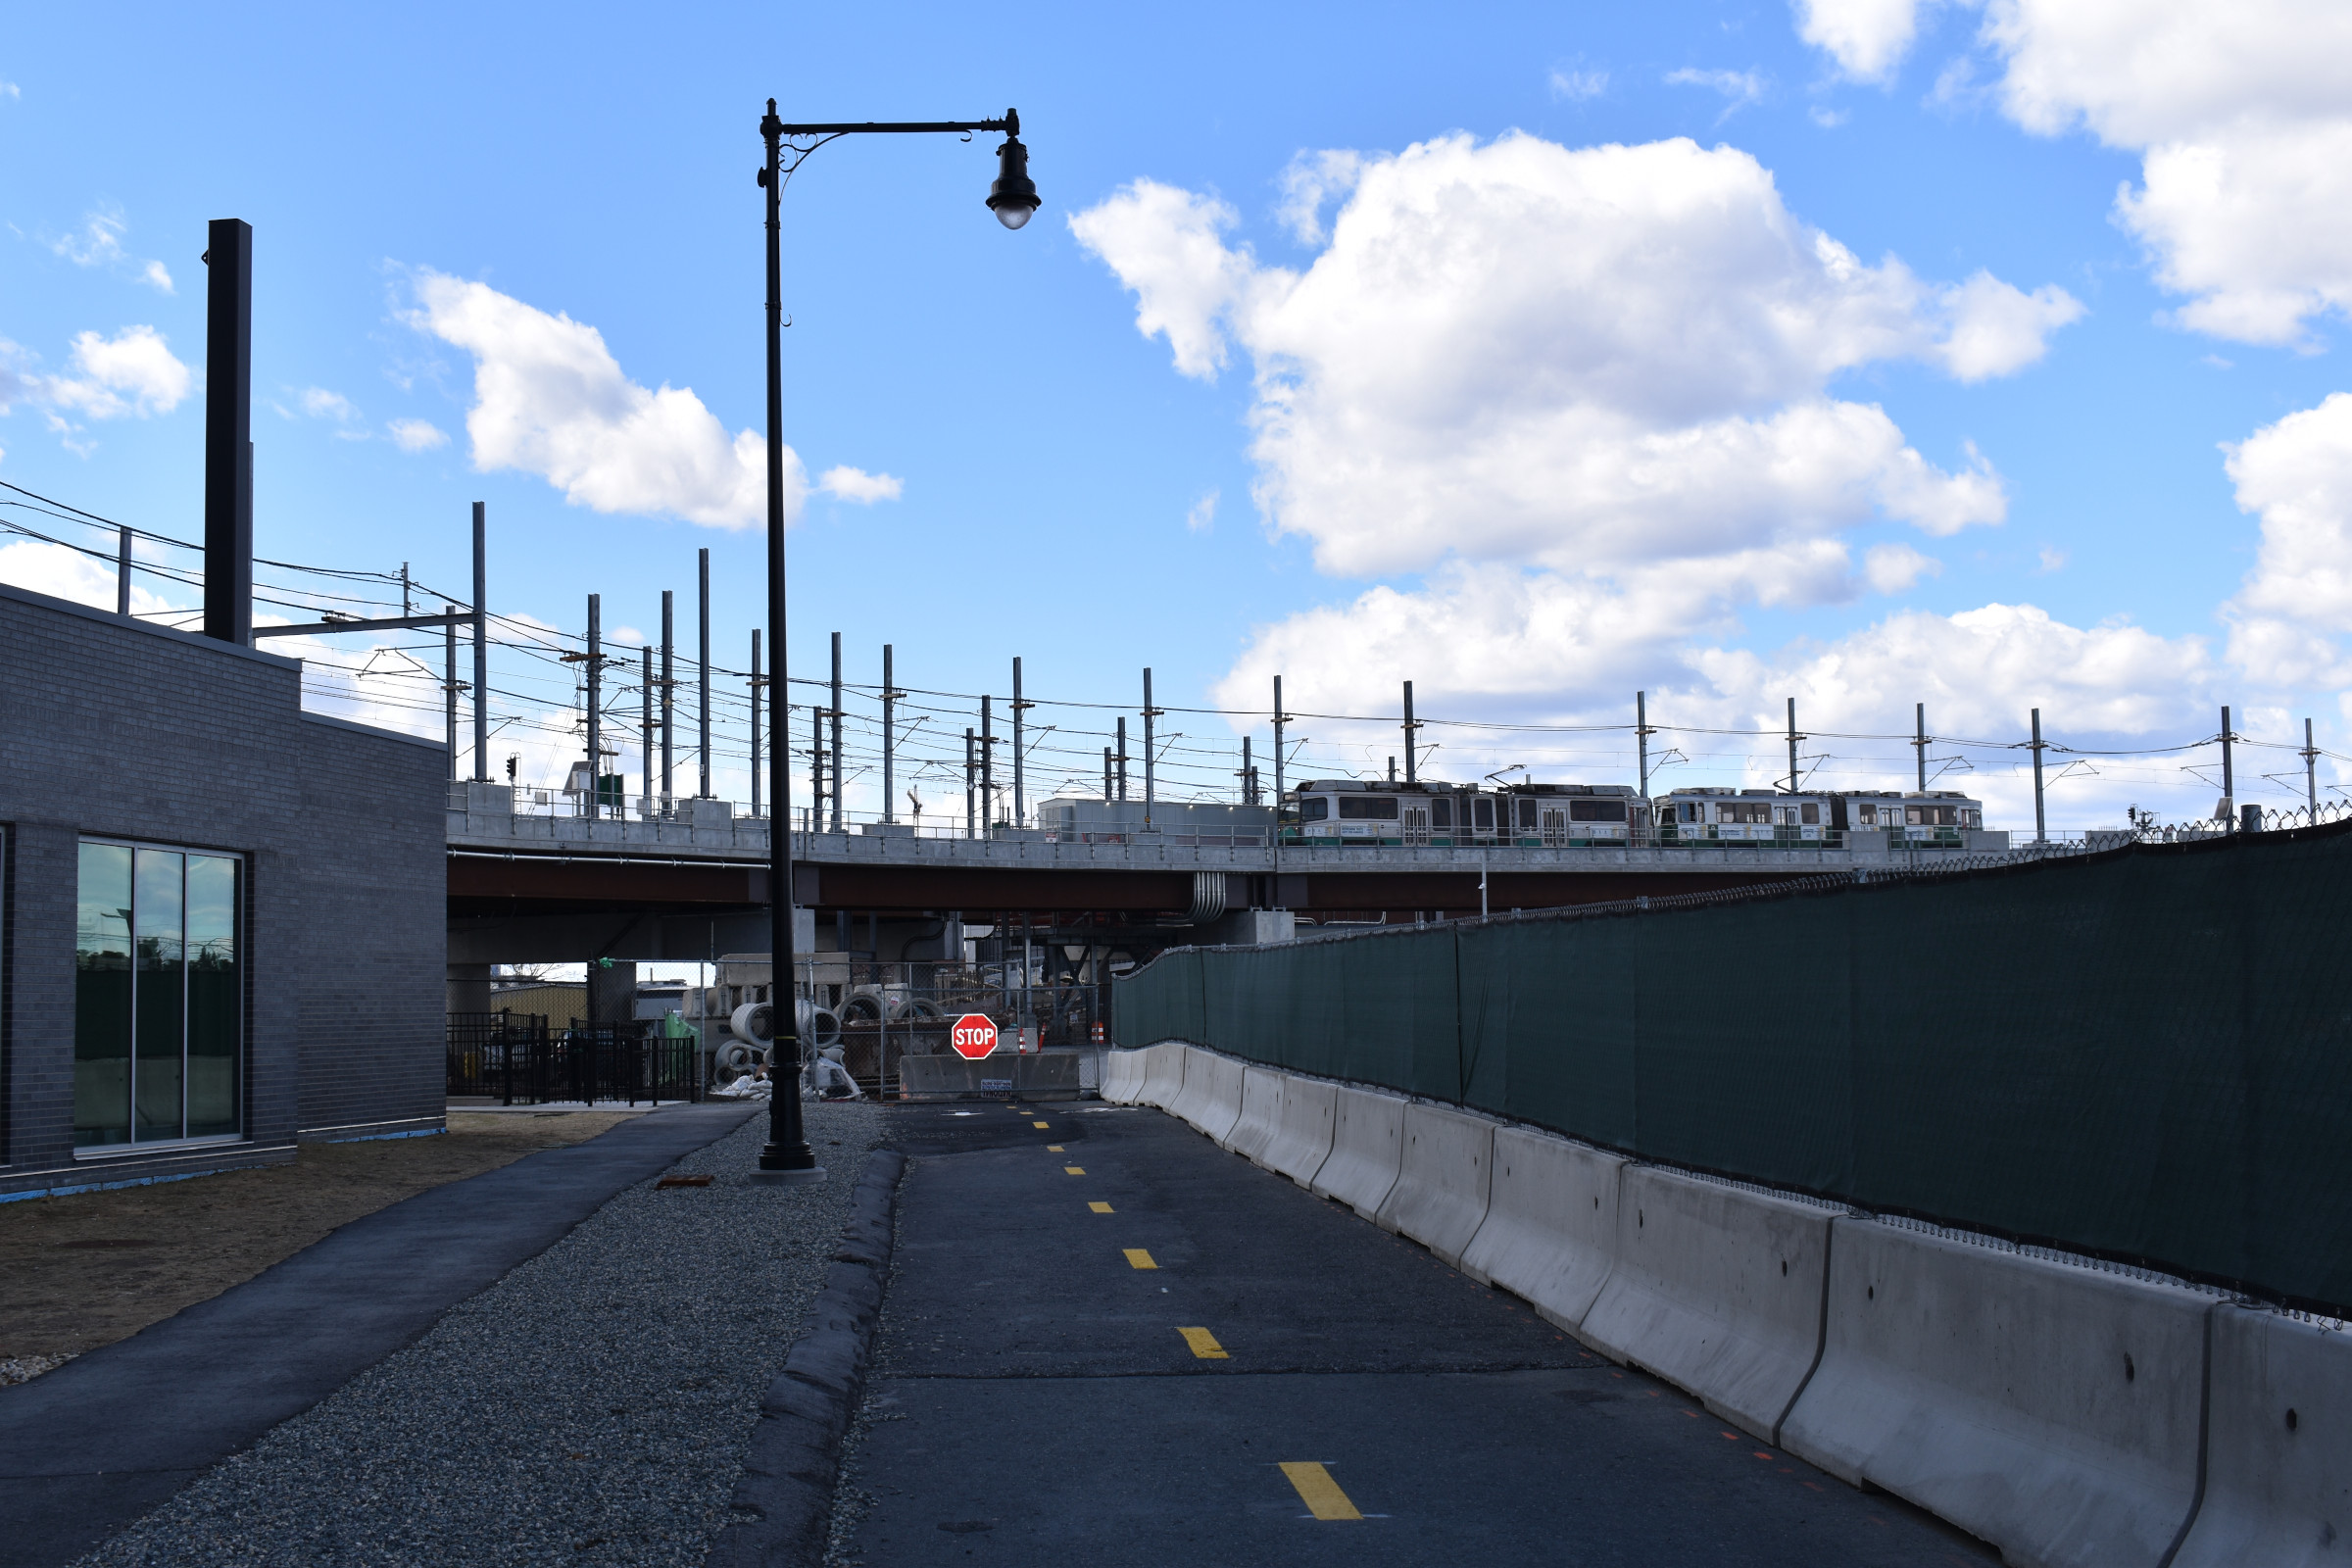 A Green Line train passes over the viaduct over the future Community Path west of Lechmere Station